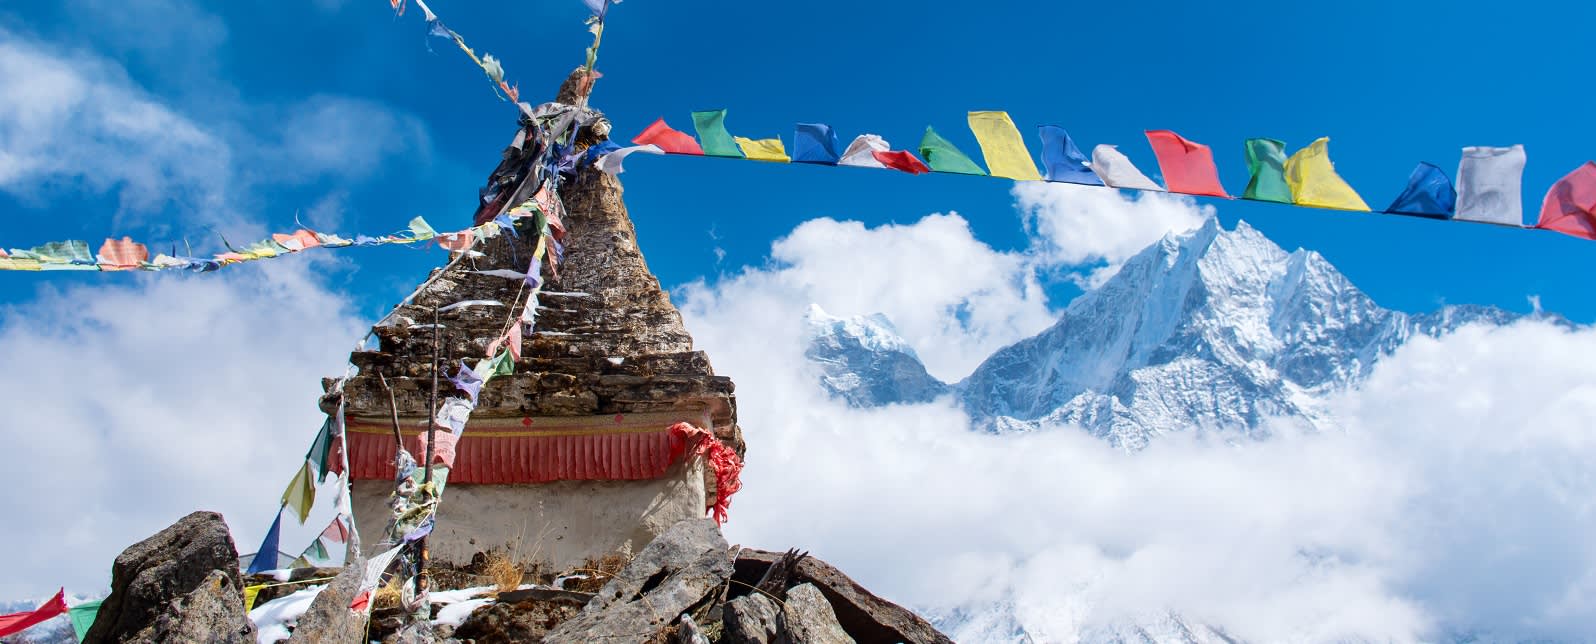 https://res.cloudinary.com/enchanting/q_70,f_auto,c_fill,g_face/enchanting-web/2023/09/Songs-of-the-Mountains-On-Your-Nepal-Tour-enchanting-travels.jpg